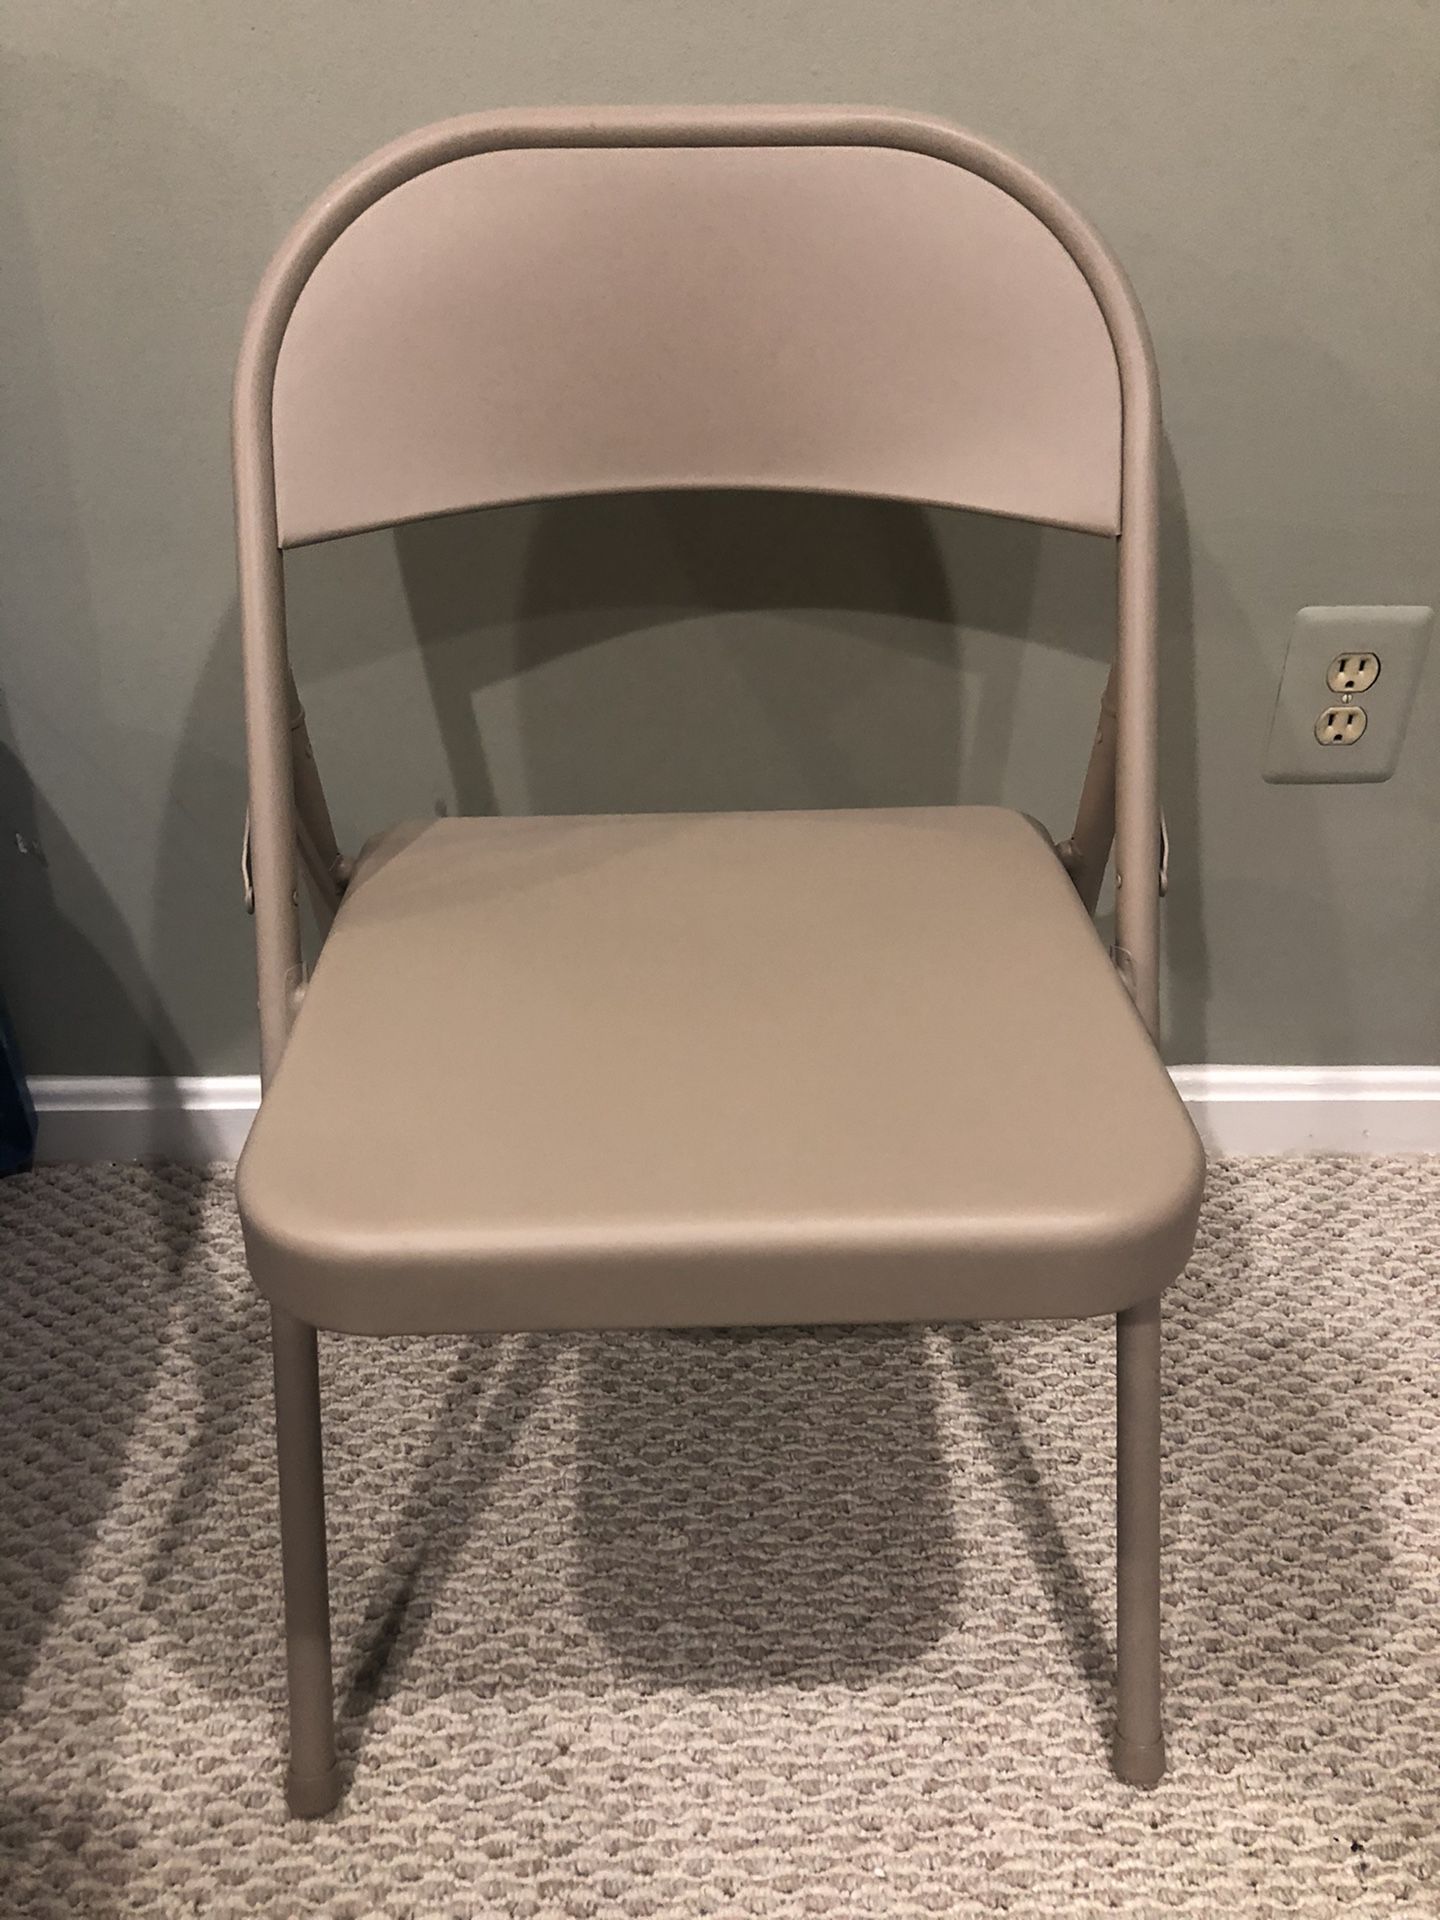 5 Foldable Beige Chairs (with or without cushions)